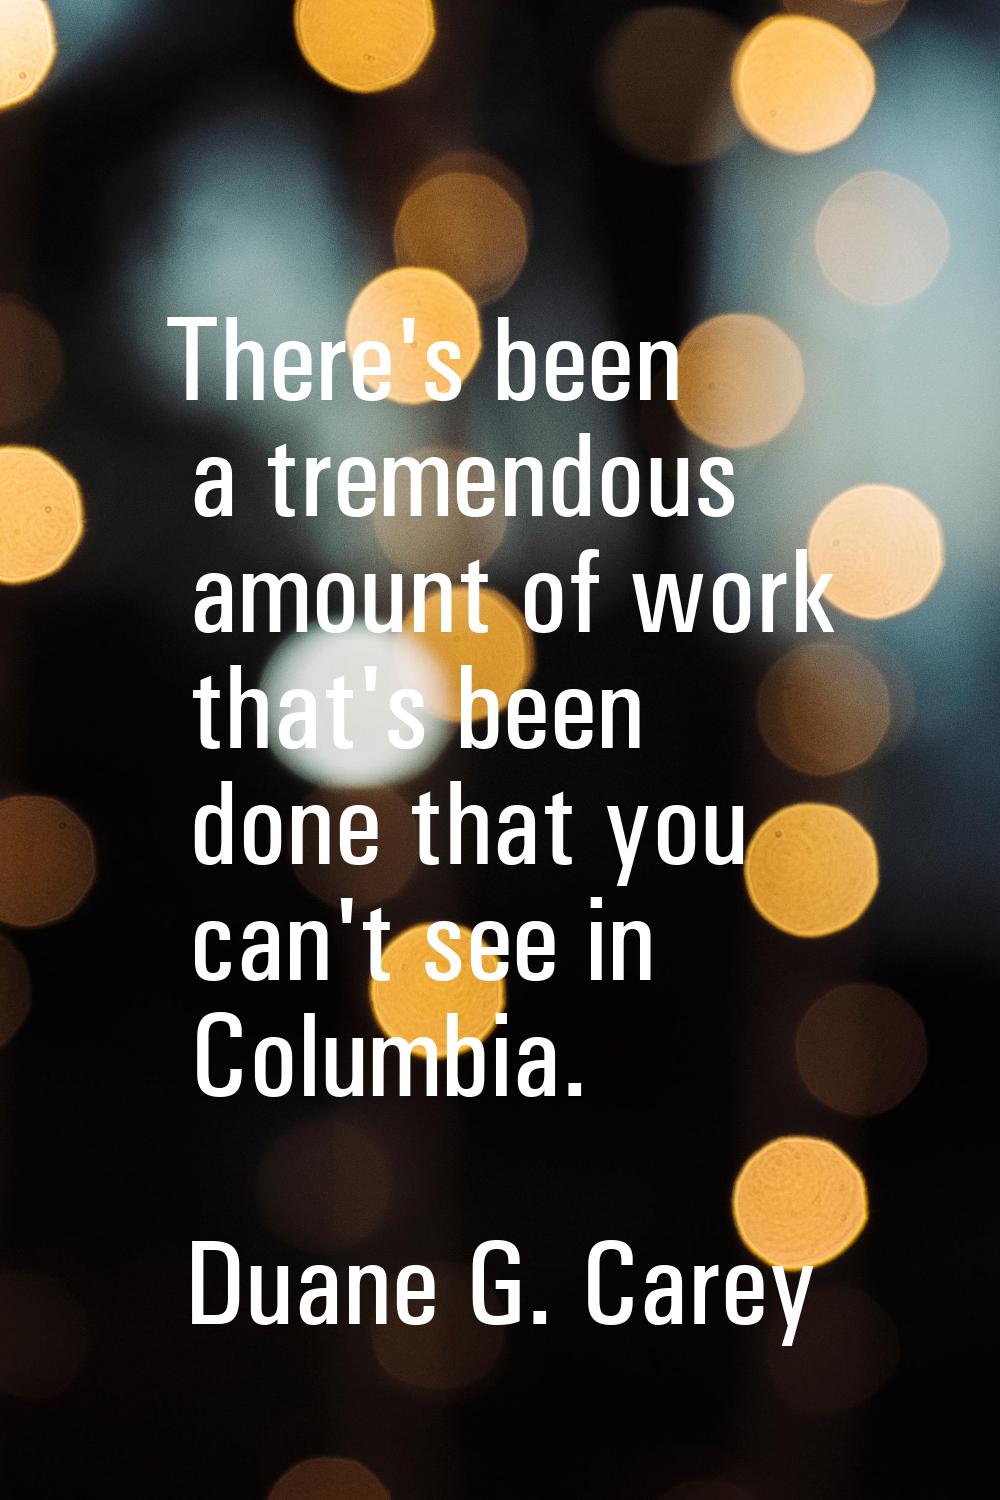 There's been a tremendous amount of work that's been done that you can't see in Columbia.